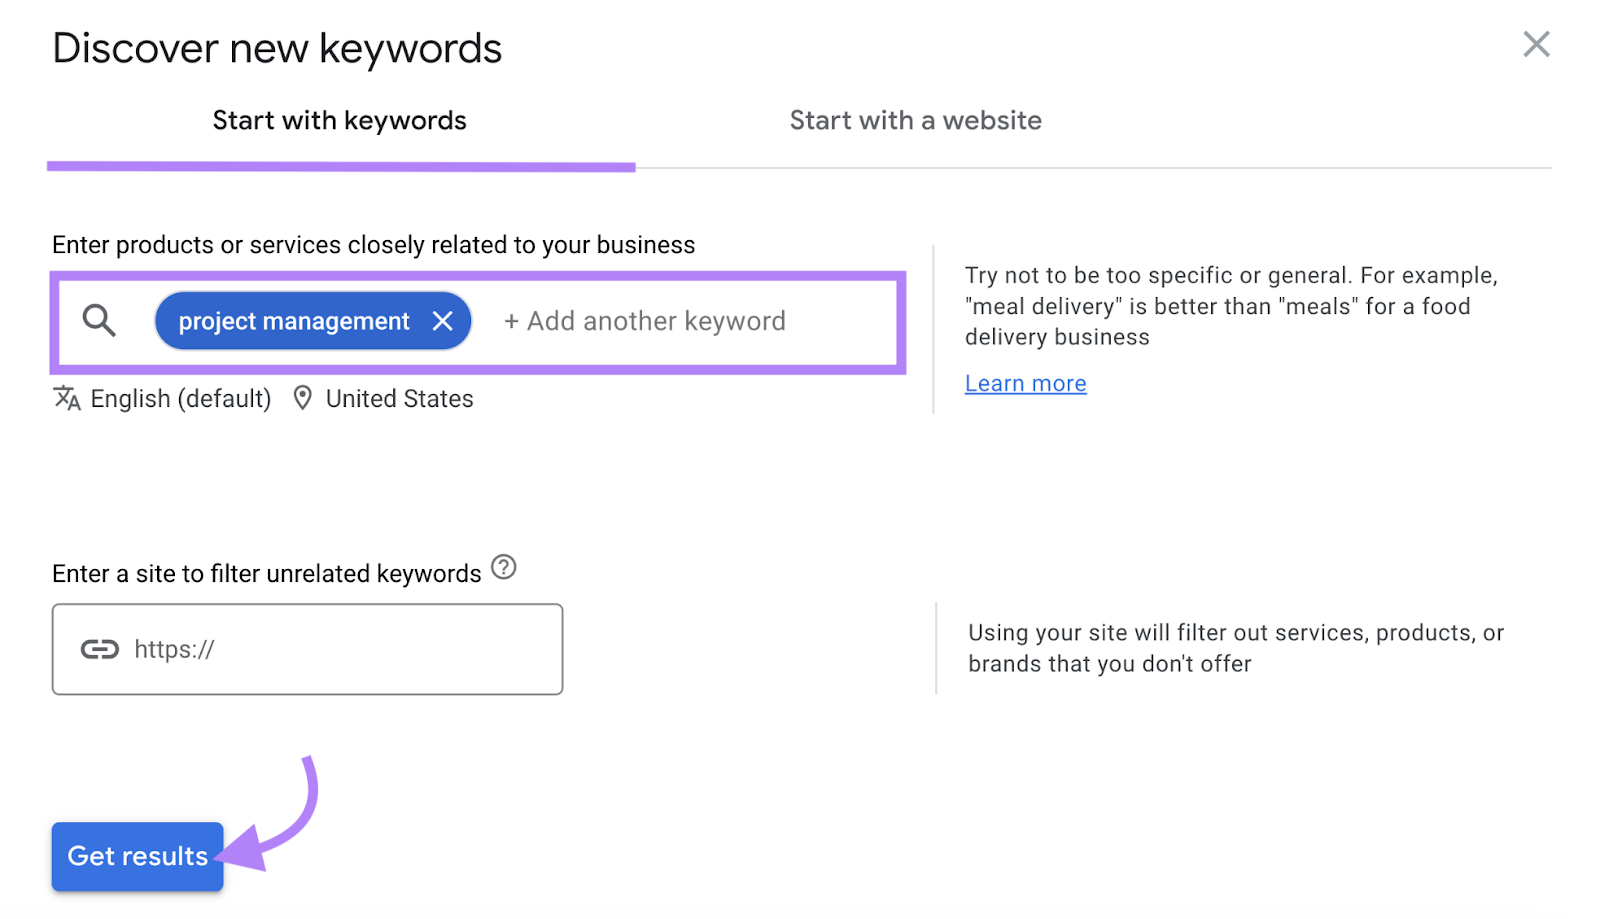 "project management" entered under the "Discover new keywords" window